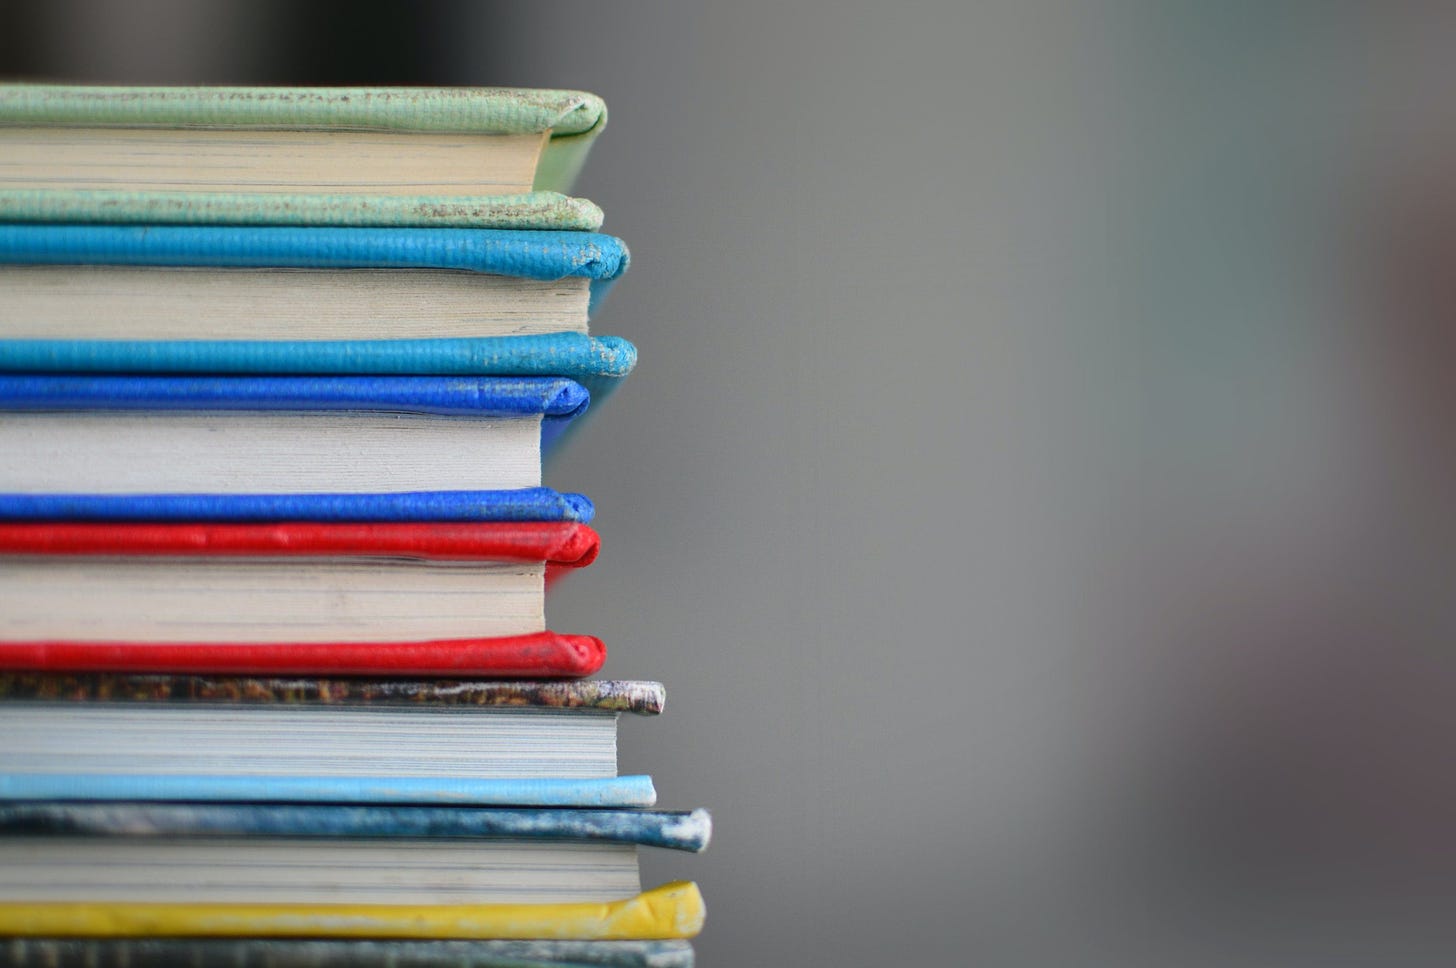 Close-up photo of edges of a stack of books.